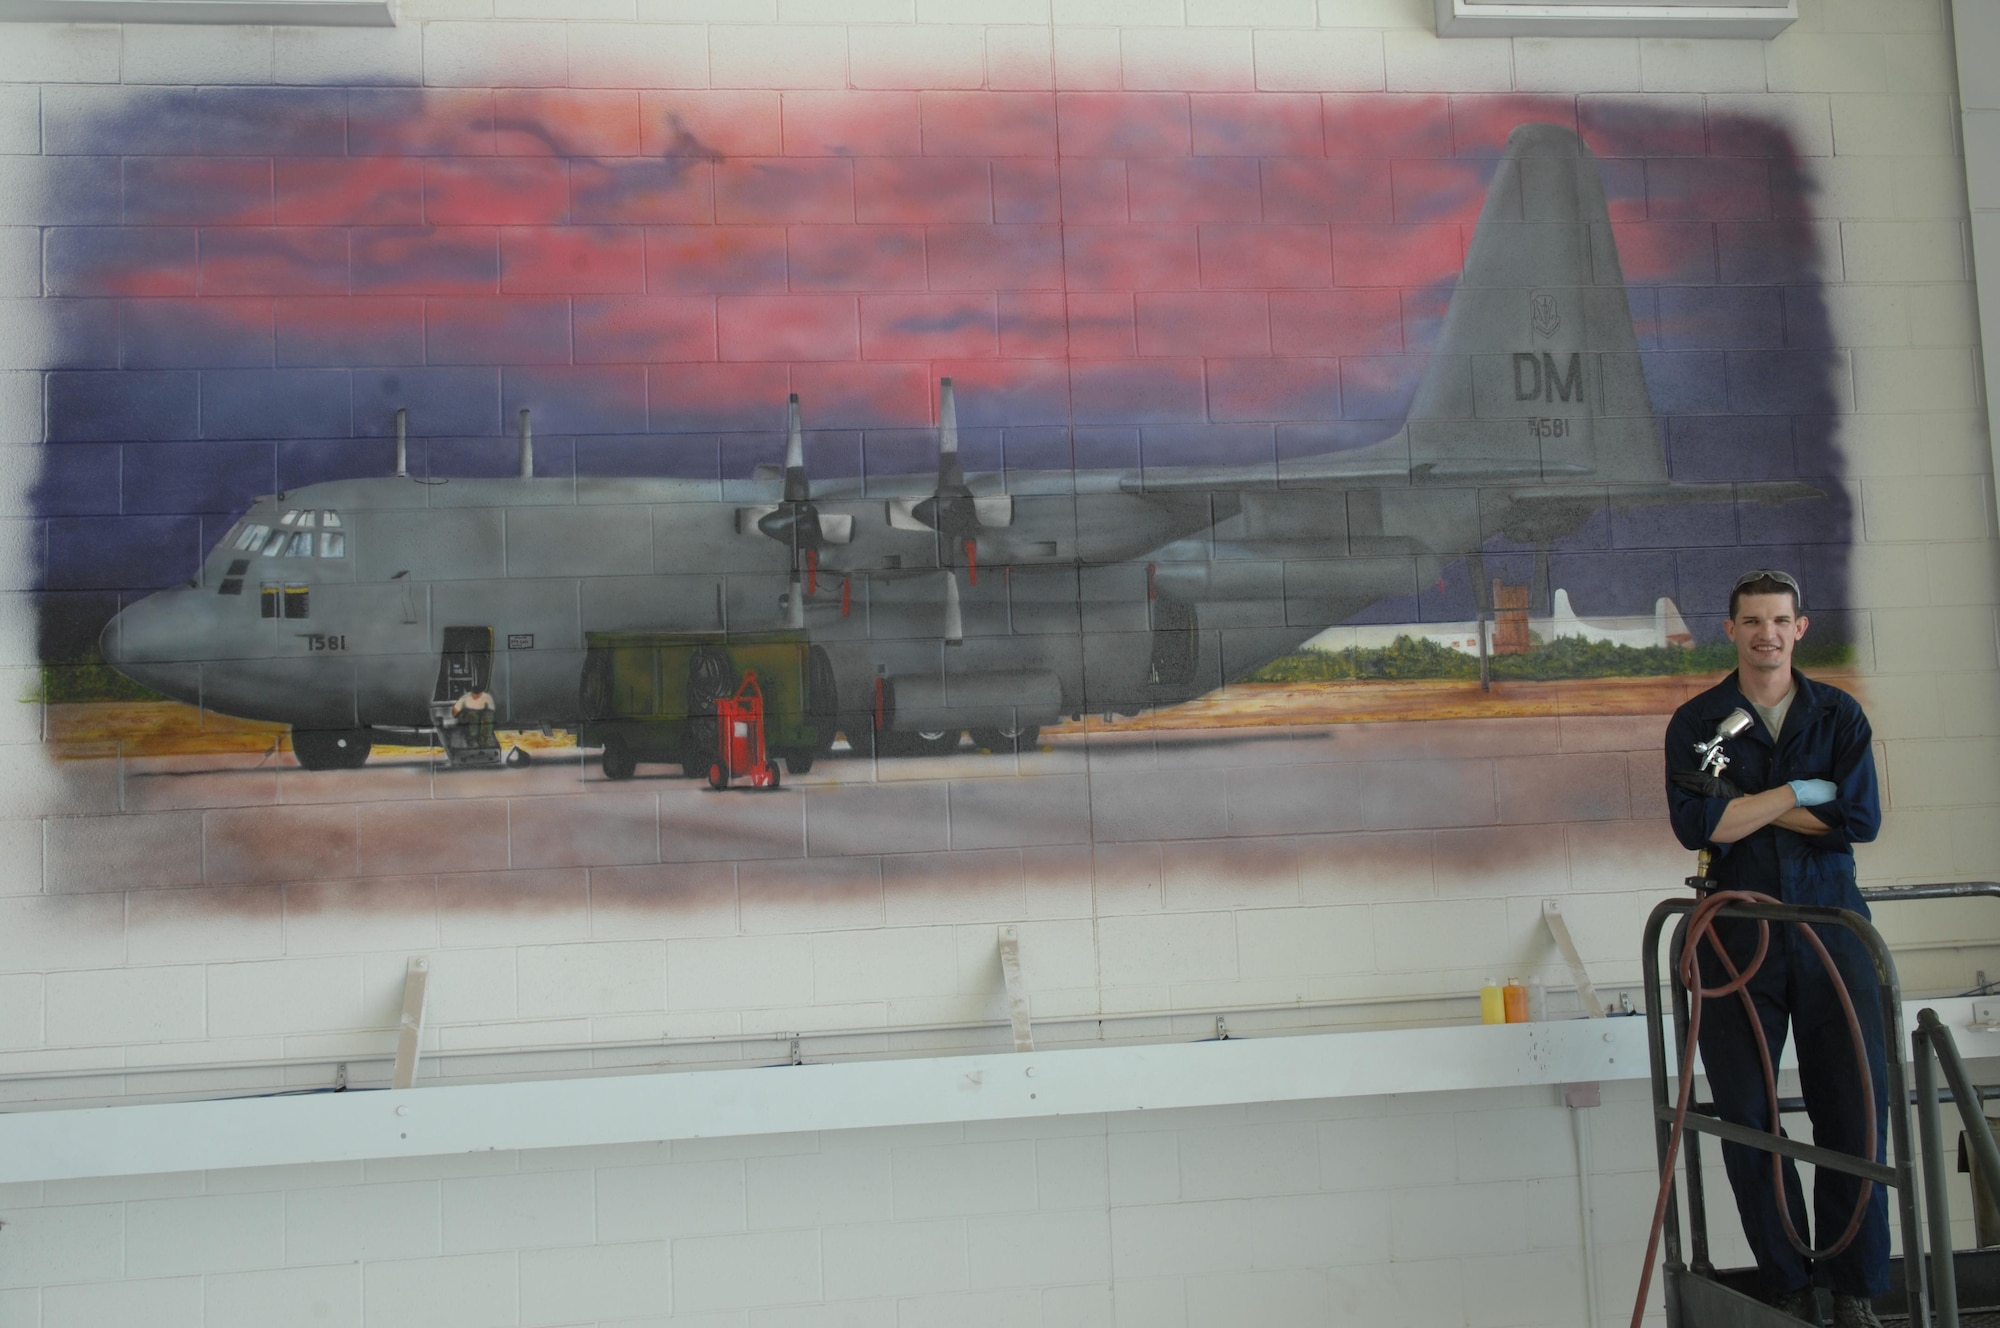 Senior Airman Patrick Corcoran stands in front of a mural he airbrushed Oct. 17, 2013 at Davis-Monthan Air Force Base, Ariz. The mural took him approximately six weeks to complete and is the second of five murals to be painted in the 755th AMXS hanger. Corcoran is a 755th Aircraft Maintenance Squadron propulsion technician.